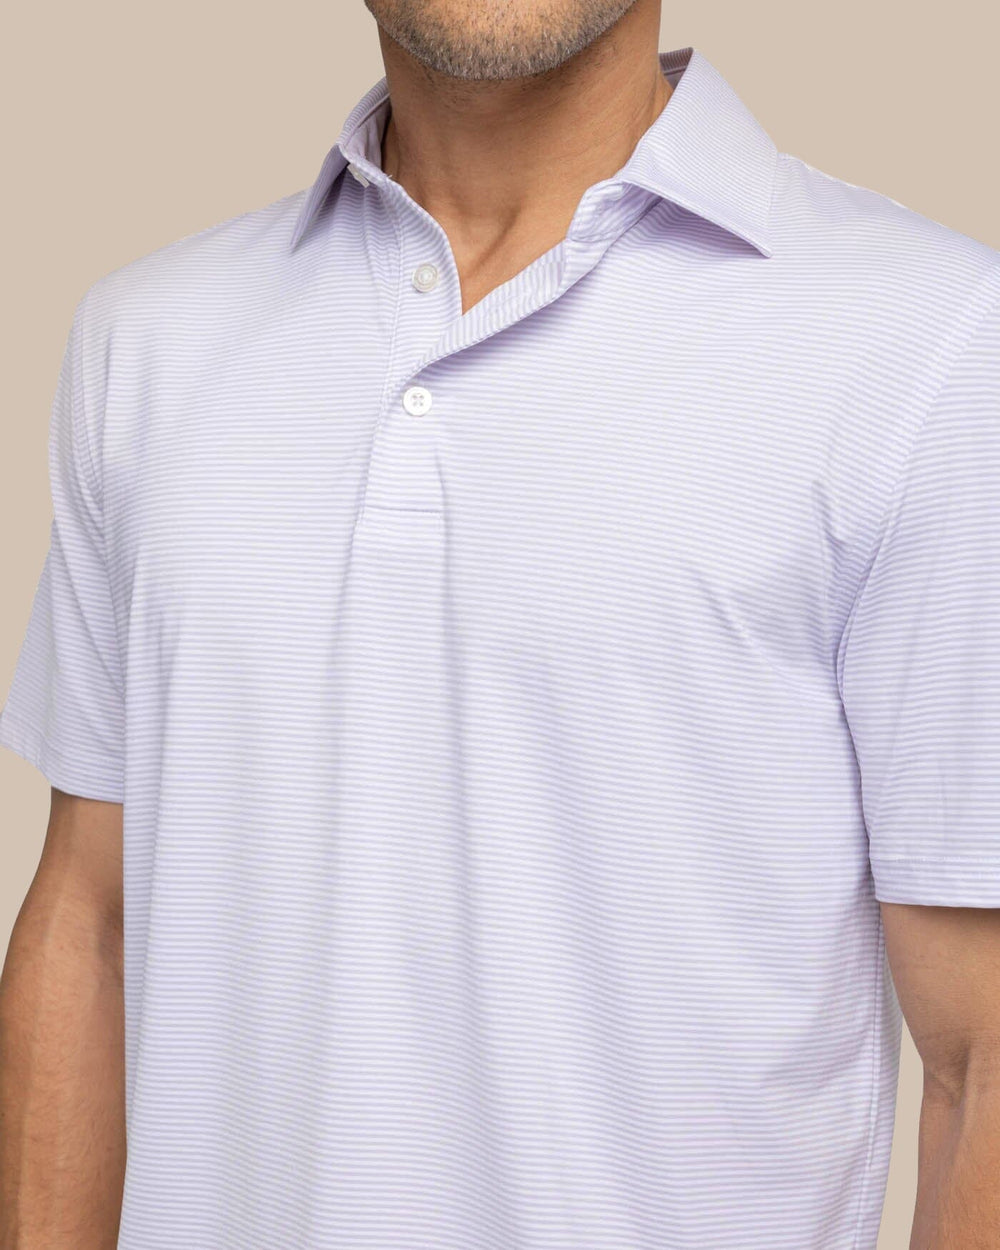 The detail view of the Southern Tide brrr-eeze Meadowbrook Stripe Polo by Southern Tide - Orchid Petal